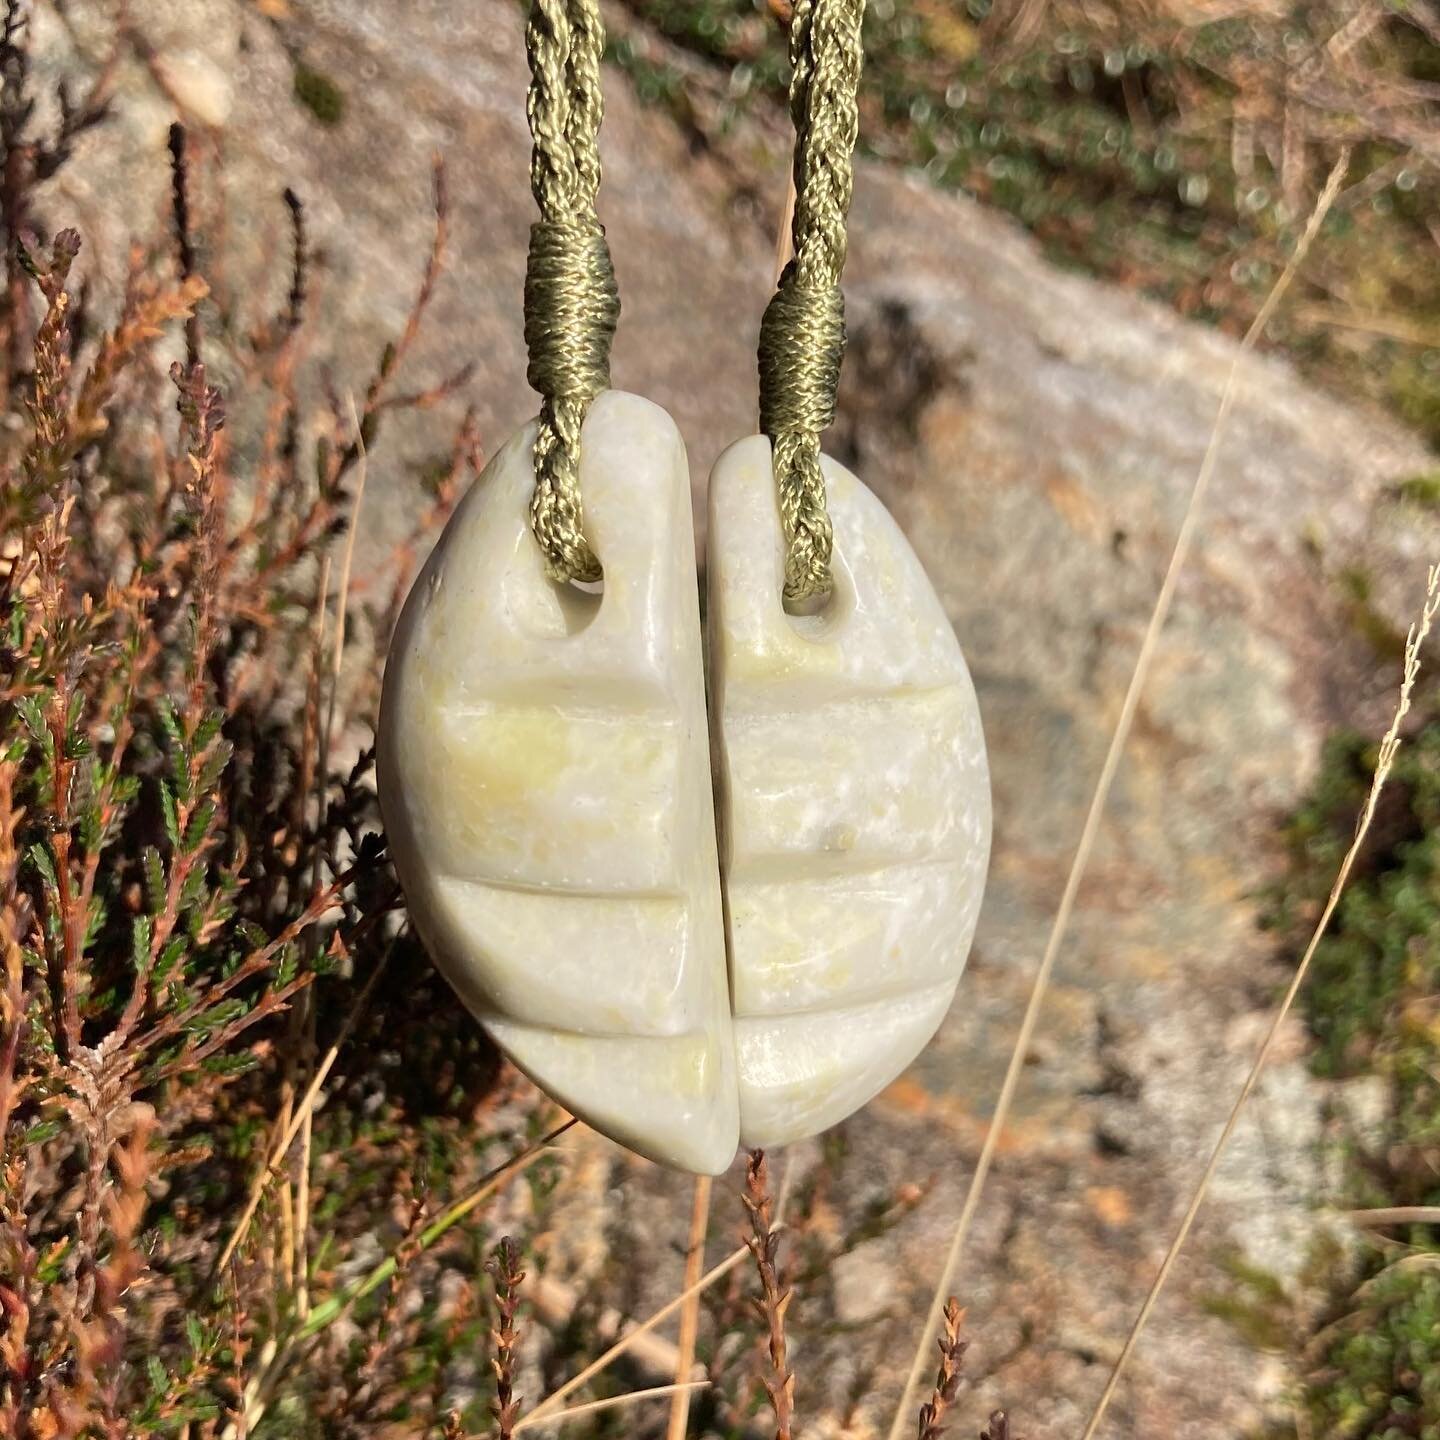 Happy Valentine&rsquo;s Day to all!

Here we have a matching pair of unique carved ridge pendants out of the stunning Iona marble.
A very different form for a special gift.

https://www.gneiss-things.com/special-collection-iona-marble-1

#IonaMarble 